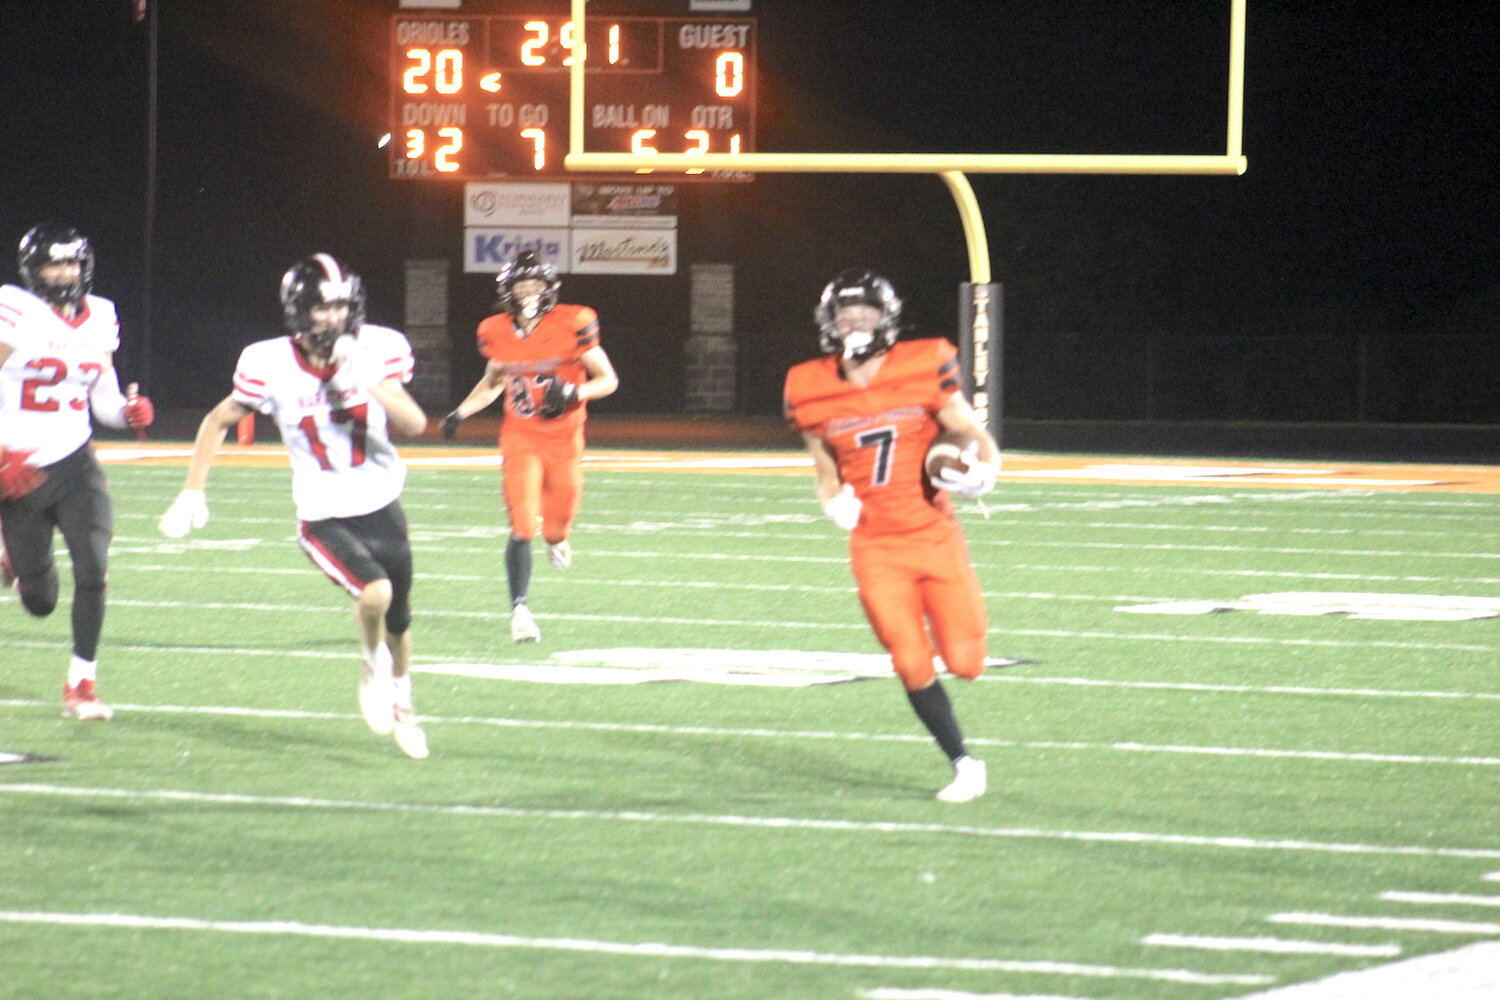 Landon Karlen (7) heads downfield on a 94-yard touchdown as Marathon attempts to stop the Oriole momentum Friday. To the back is Rudy Kletsch (83) who later scored his own touchdown.